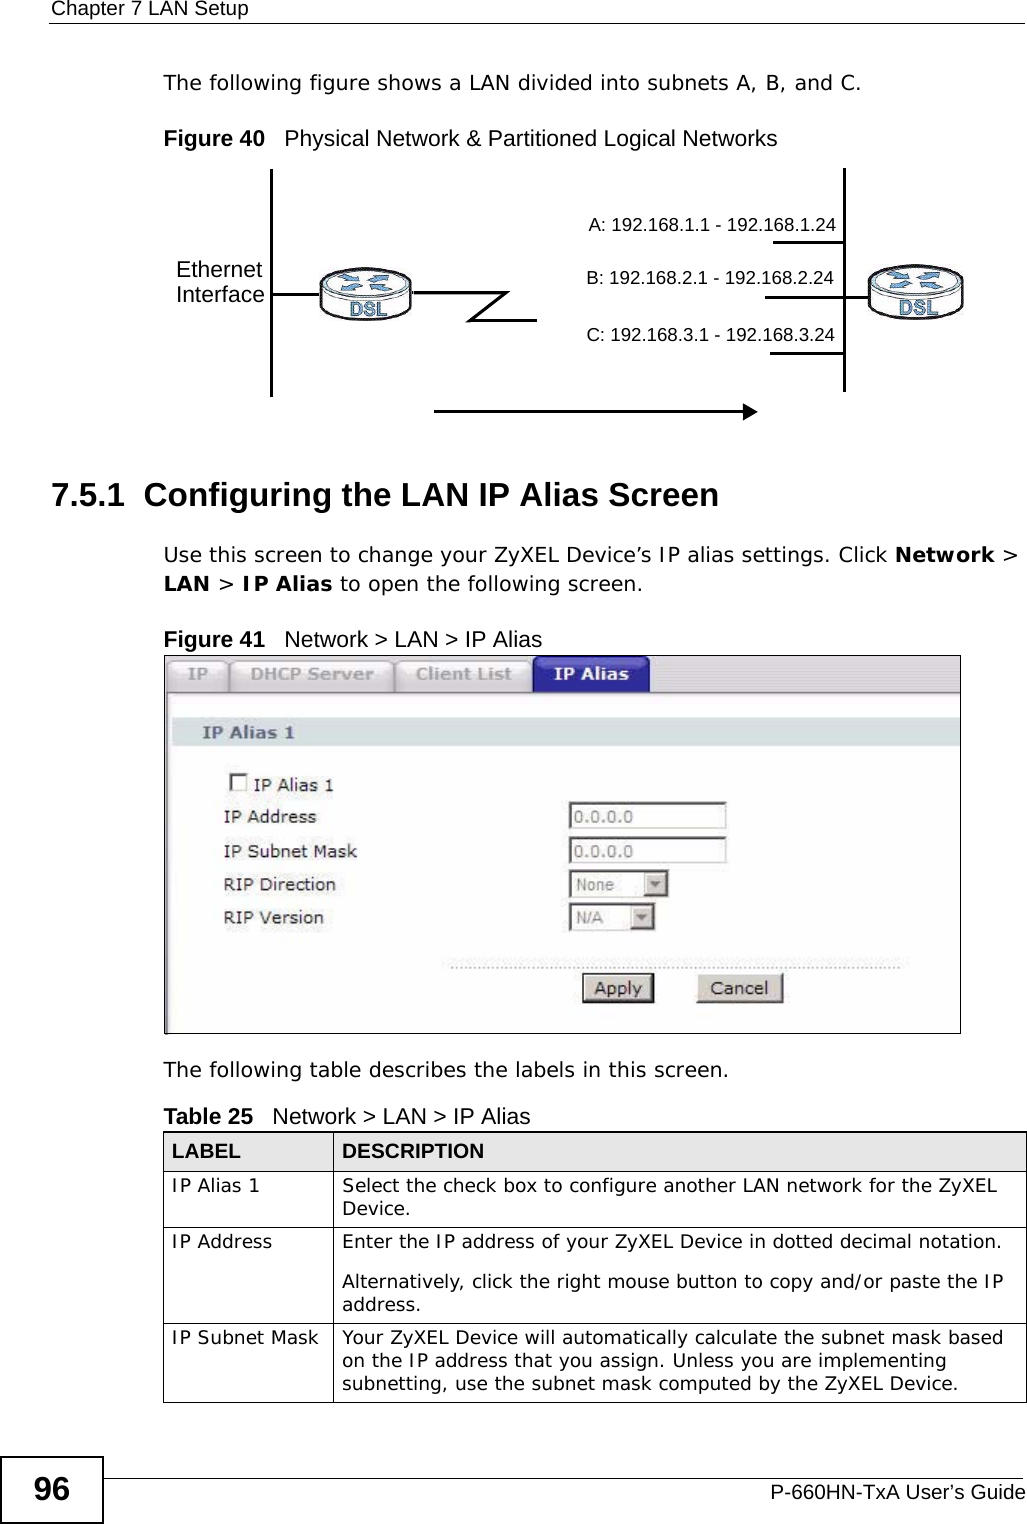 Chapter 7 LAN SetupP-660HN-TxA User’s Guide96The following figure shows a LAN divided into subnets A, B, and C.Figure 40   Physical Network &amp; Partitioned Logical Networks7.5.1  Configuring the LAN IP Alias ScreenUse this screen to change your ZyXEL Device’s IP alias settings. Click Network &gt; LAN &gt; IP Alias to open the following screen.Figure 41   Network &gt; LAN &gt; IP AliasThe following table describes the labels in this screen. EthernetInterfaceA: 192.168.1.1 - 192.168.1.24B: 192.168.2.1 - 192.168.2.24C: 192.168.3.1 - 192.168.3.24Table 25   Network &gt; LAN &gt; IP Alias LABEL DESCRIPTIONIP Alias 1 Select the check box to configure another LAN network for the ZyXEL Device.IP Address Enter the IP address of your ZyXEL Device in dotted decimal notation. Alternatively, click the right mouse button to copy and/or paste the IP address.IP Subnet Mask Your ZyXEL Device will automatically calculate the subnet mask based on the IP address that you assign. Unless you are implementing subnetting, use the subnet mask computed by the ZyXEL Device.